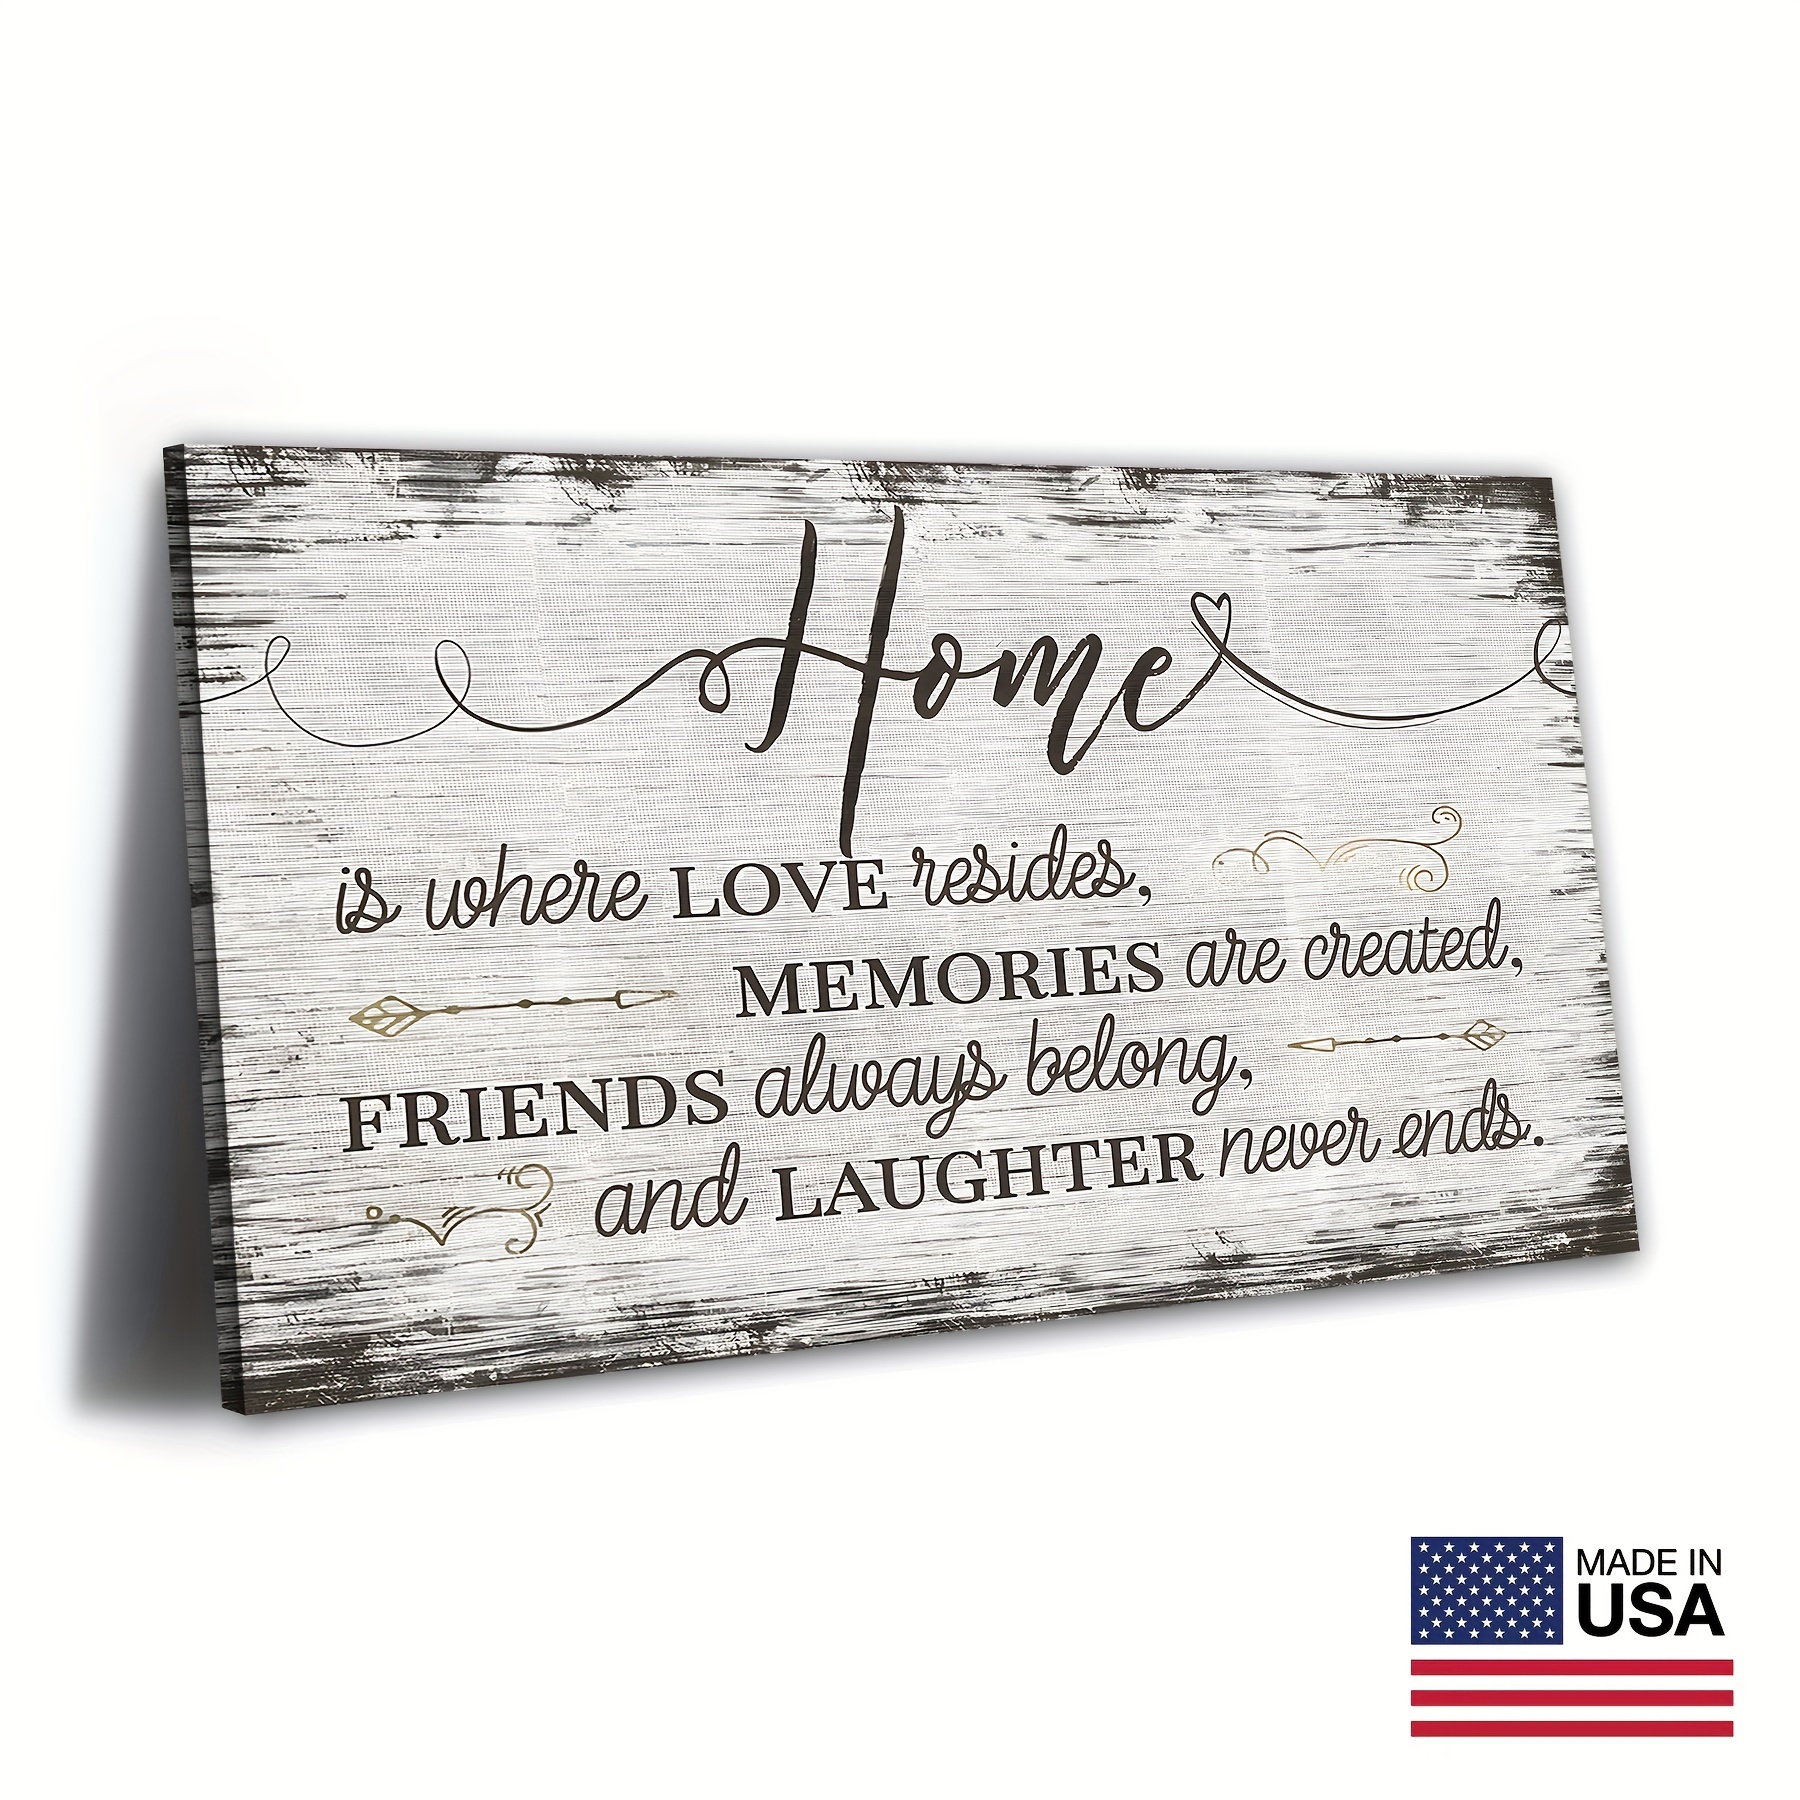 

1pc Wooden Framed Home Inspirational Canvas Wall Art Rustic Family Wood Design Print Motivational Quotes Canvas Pictures For Home Office Farmhouse Living Room Decor, Canvas Framed